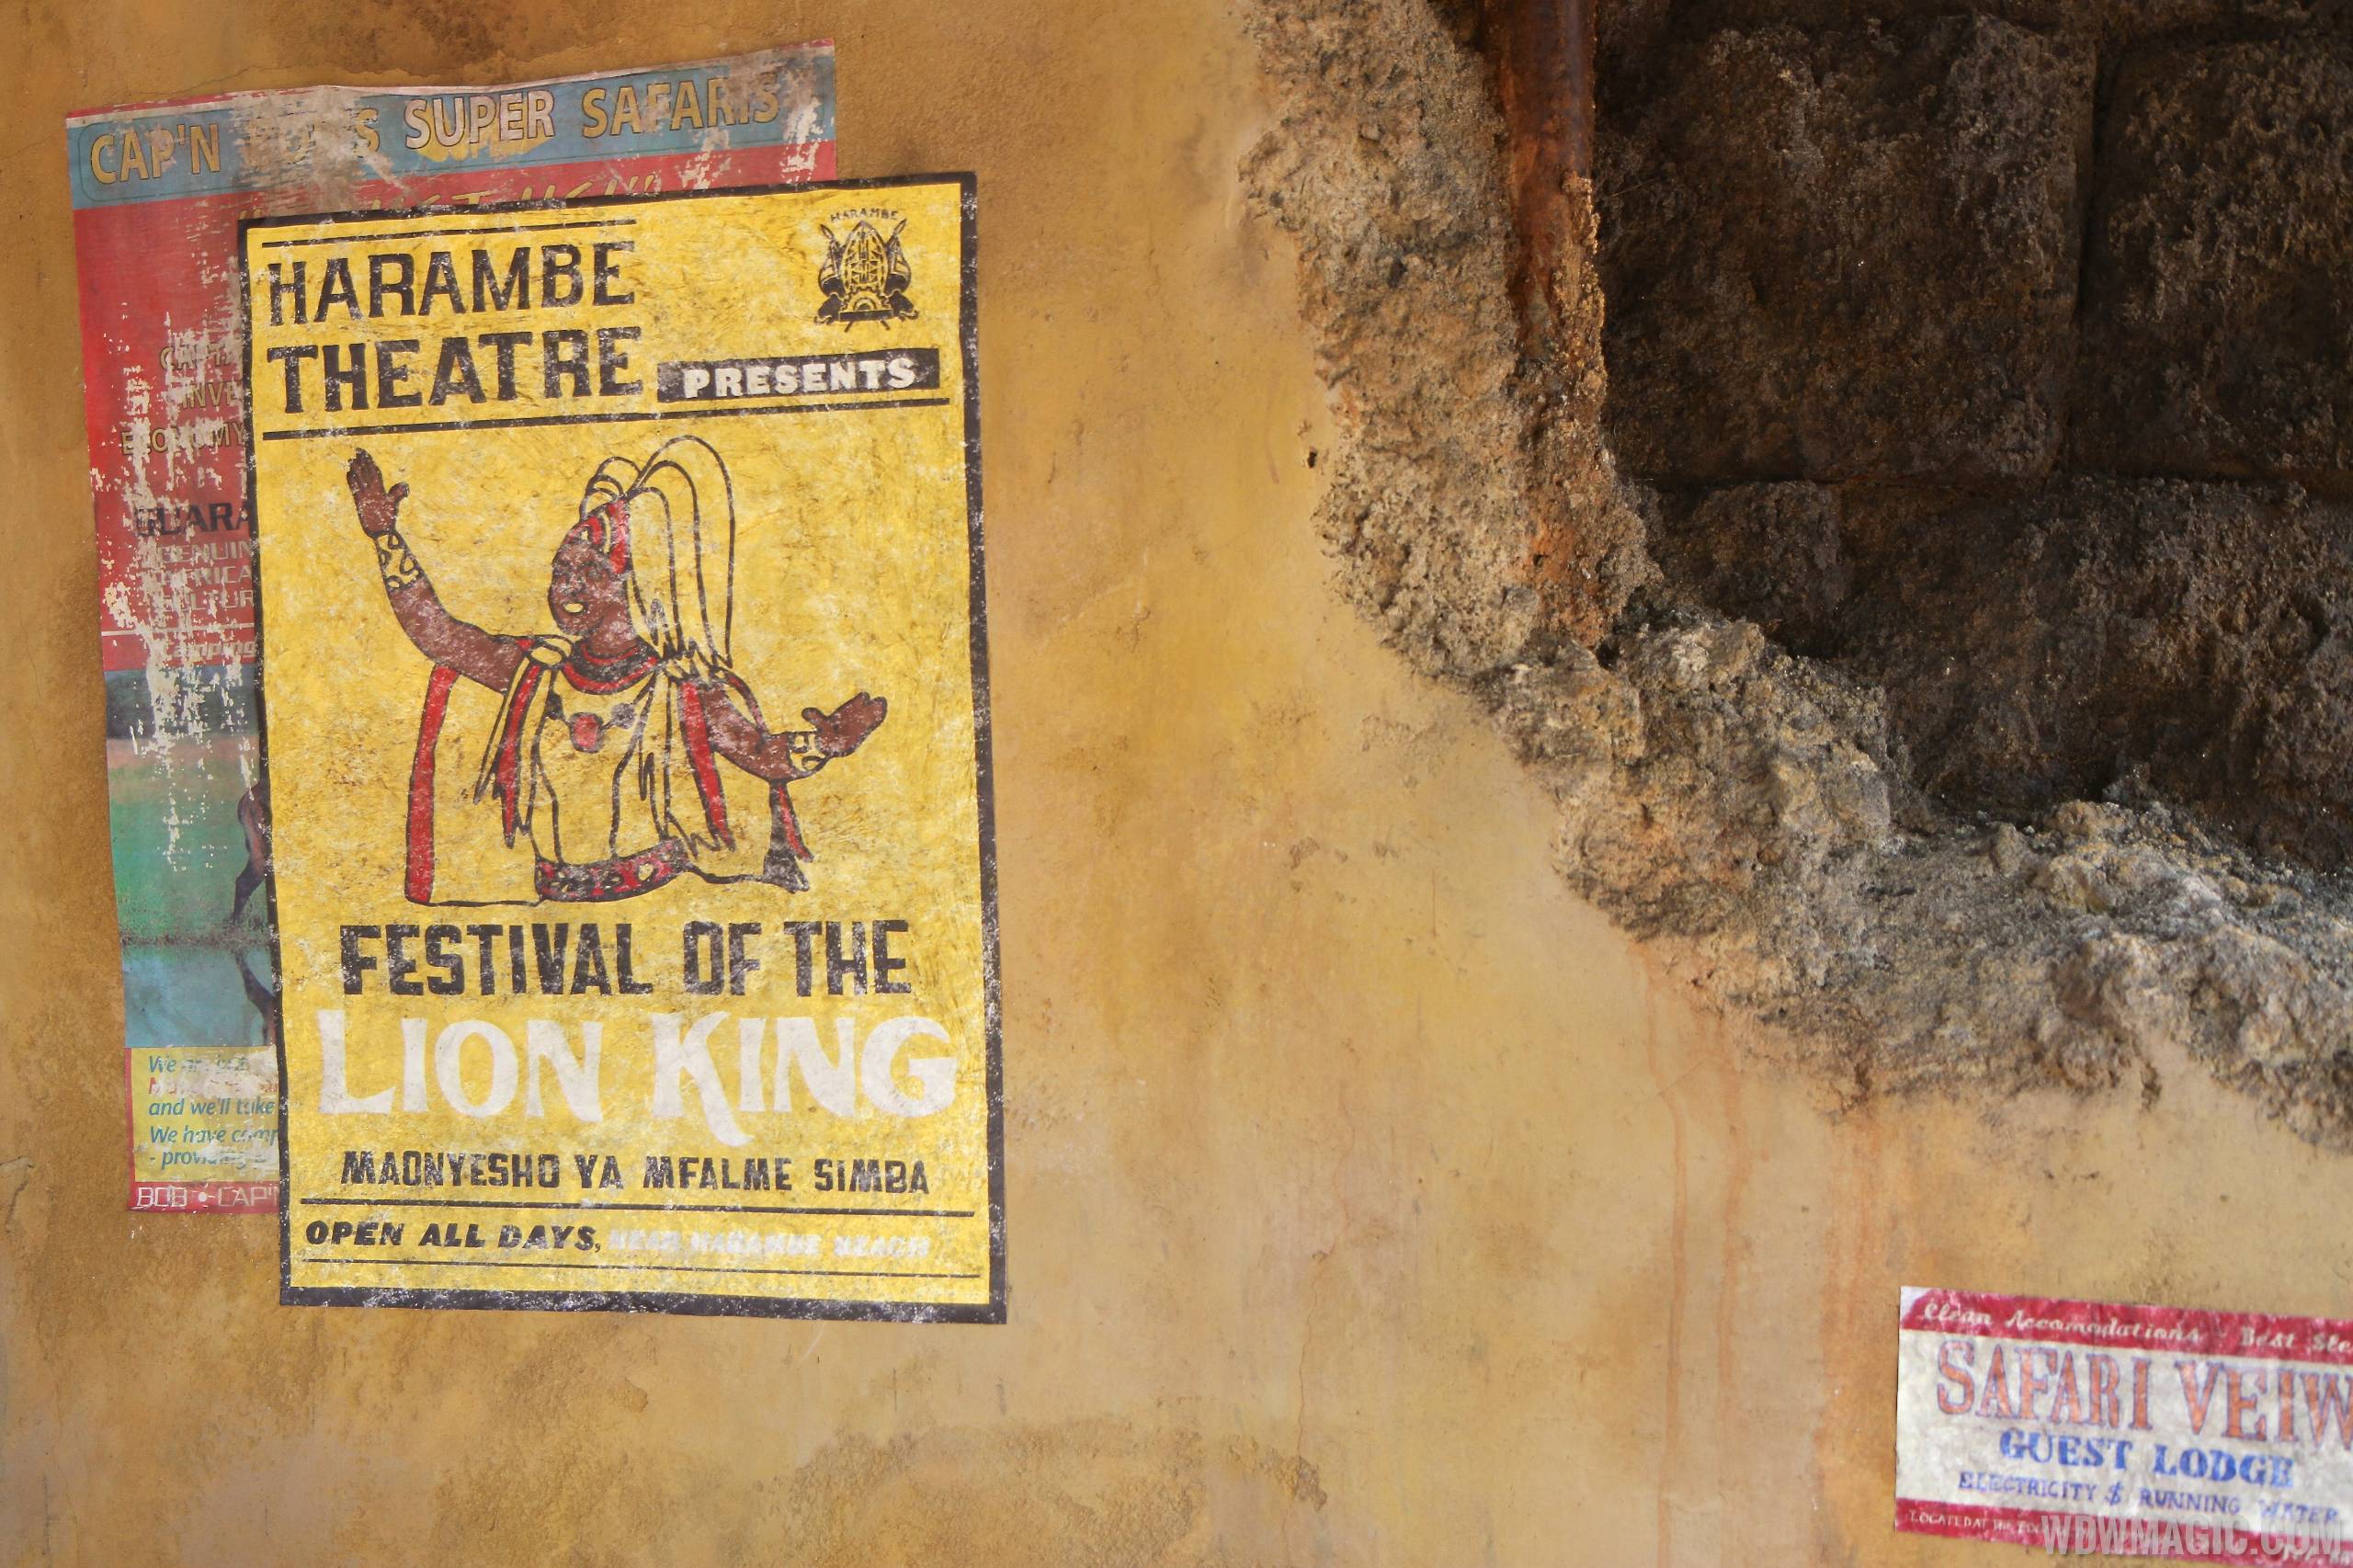 New Harambe Theatre area in Africa - Wall art on the restrooms